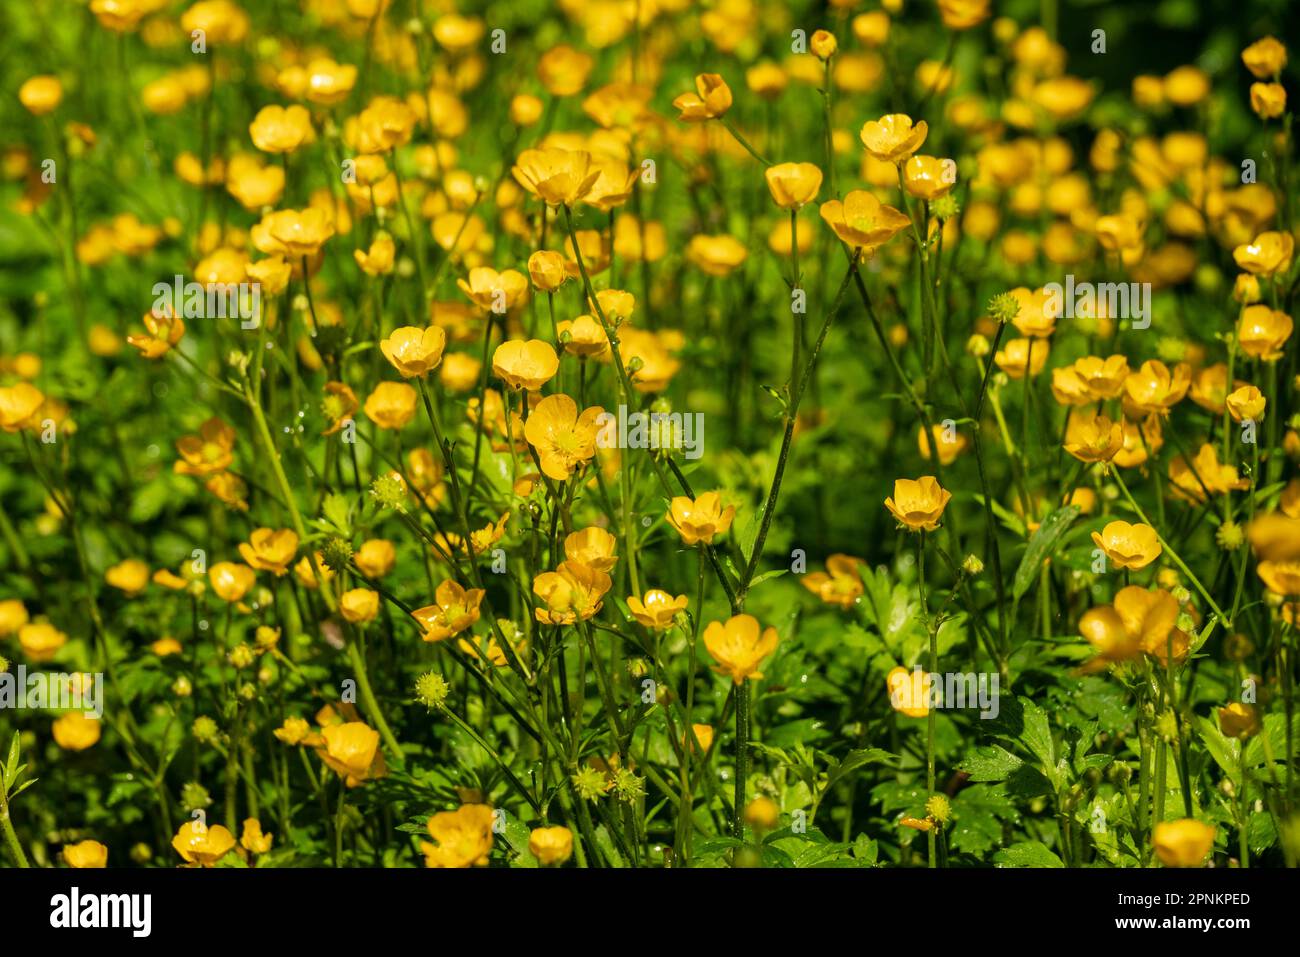 Full frame shot of a large group of yellow flowering buttercup plants (Ranunculus acris) in spring, forming a nice natural background image Stock Photo